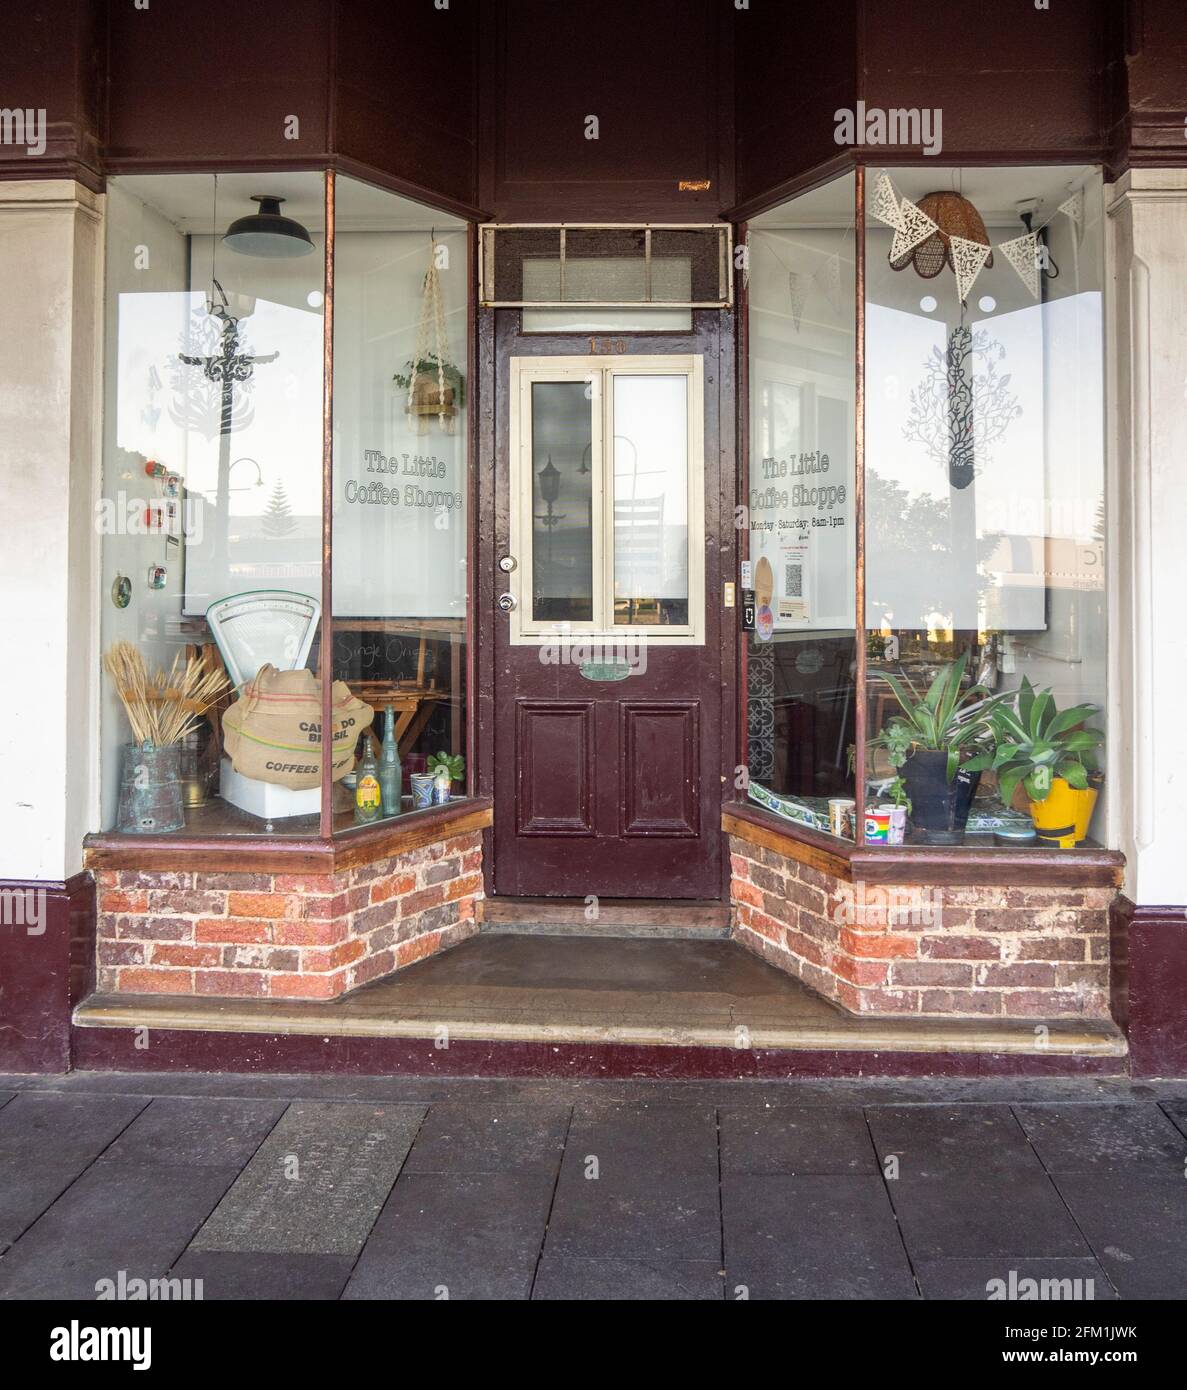 Entrance to The Little Coffee Shoppe on Stirling Tce Albany Western Australia. Stock Photo